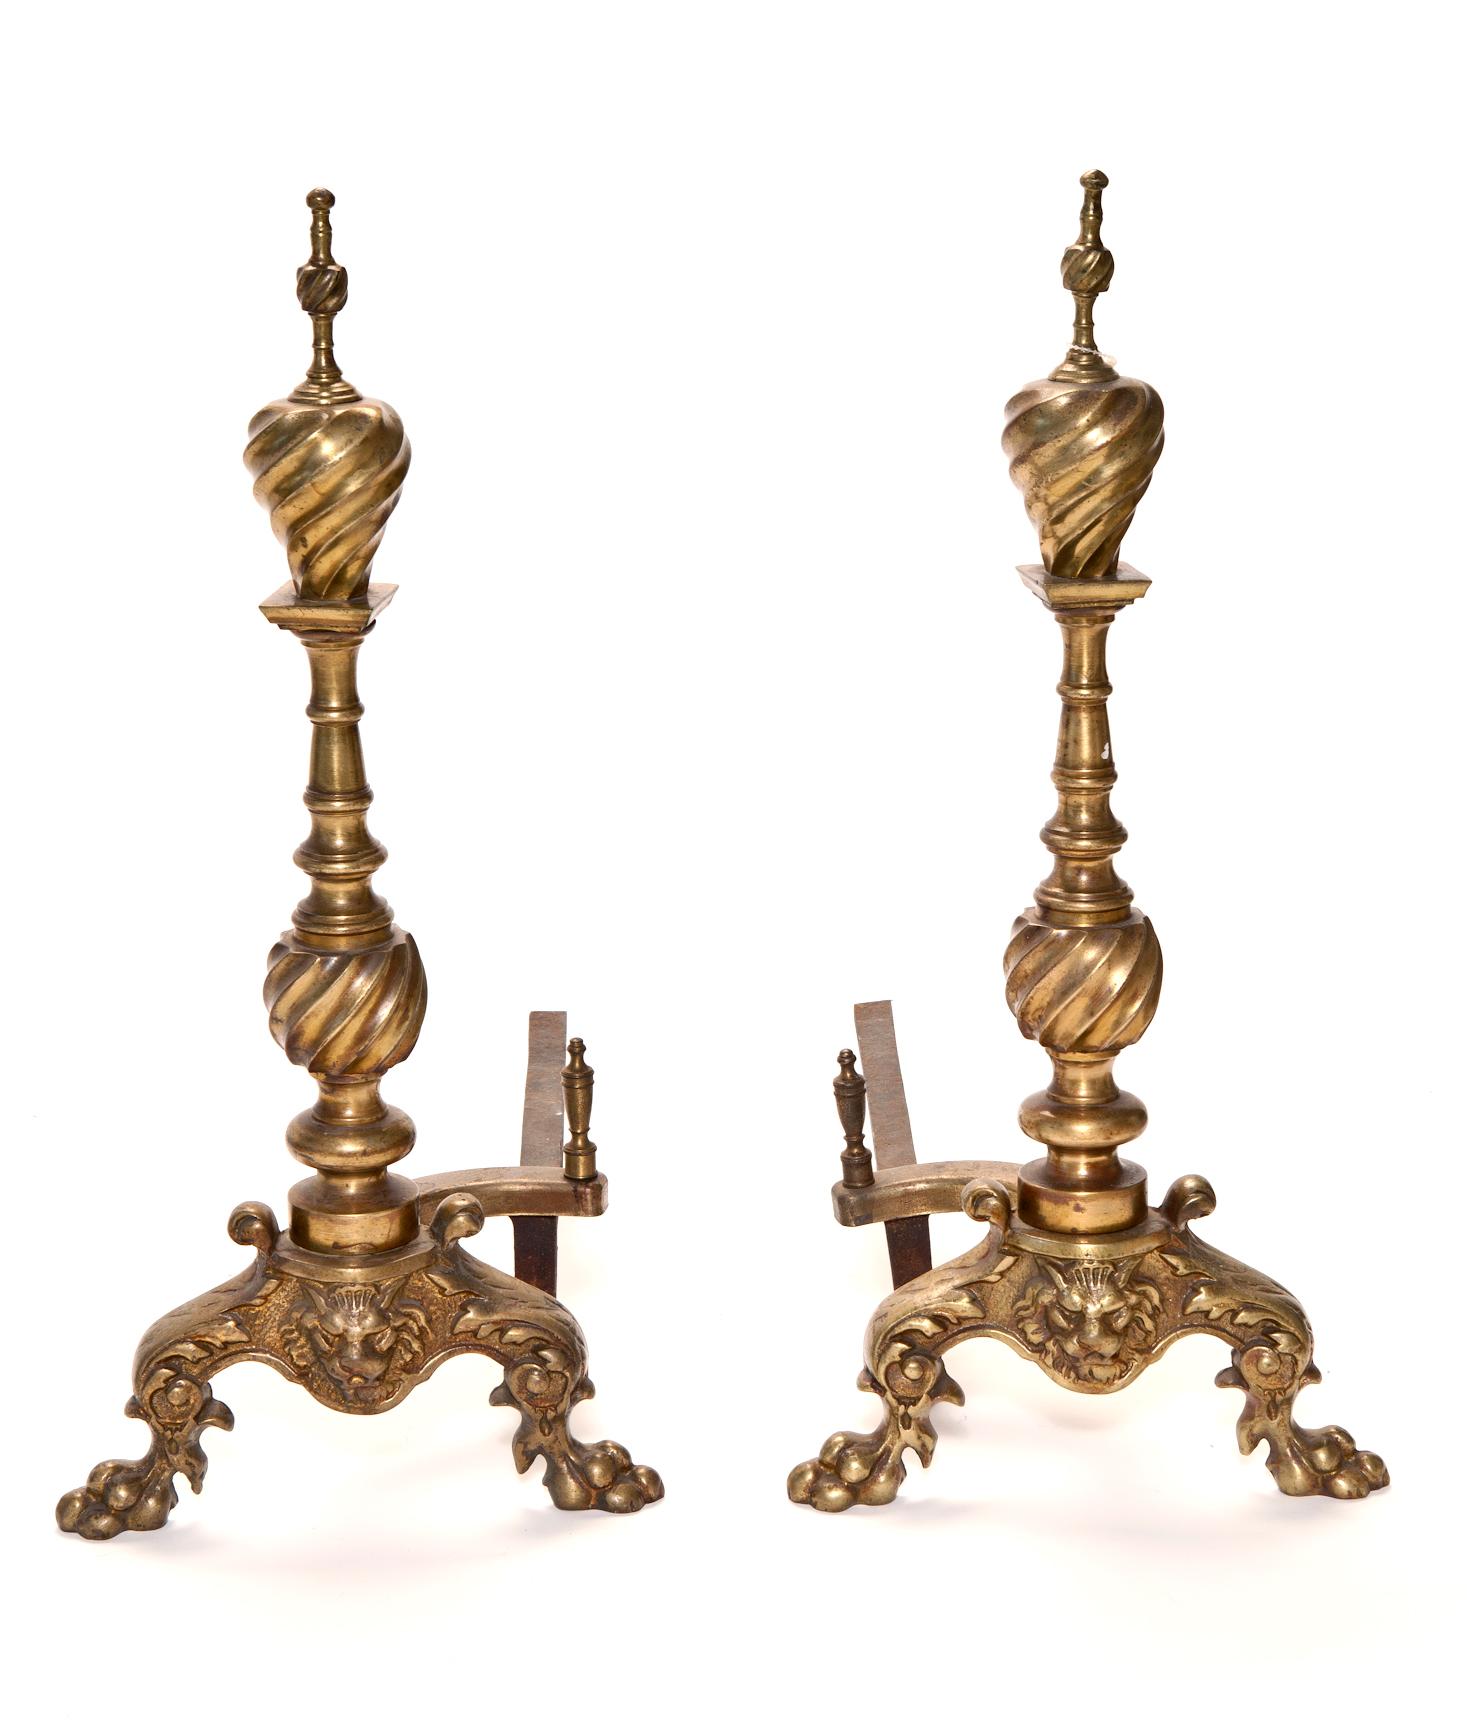 Stunning pair of 19th century European brass andirons. Intricately decorated feet & legs with lion motif with twisted brass finials.
Available for limited time, after which this will no longer be on this platform.